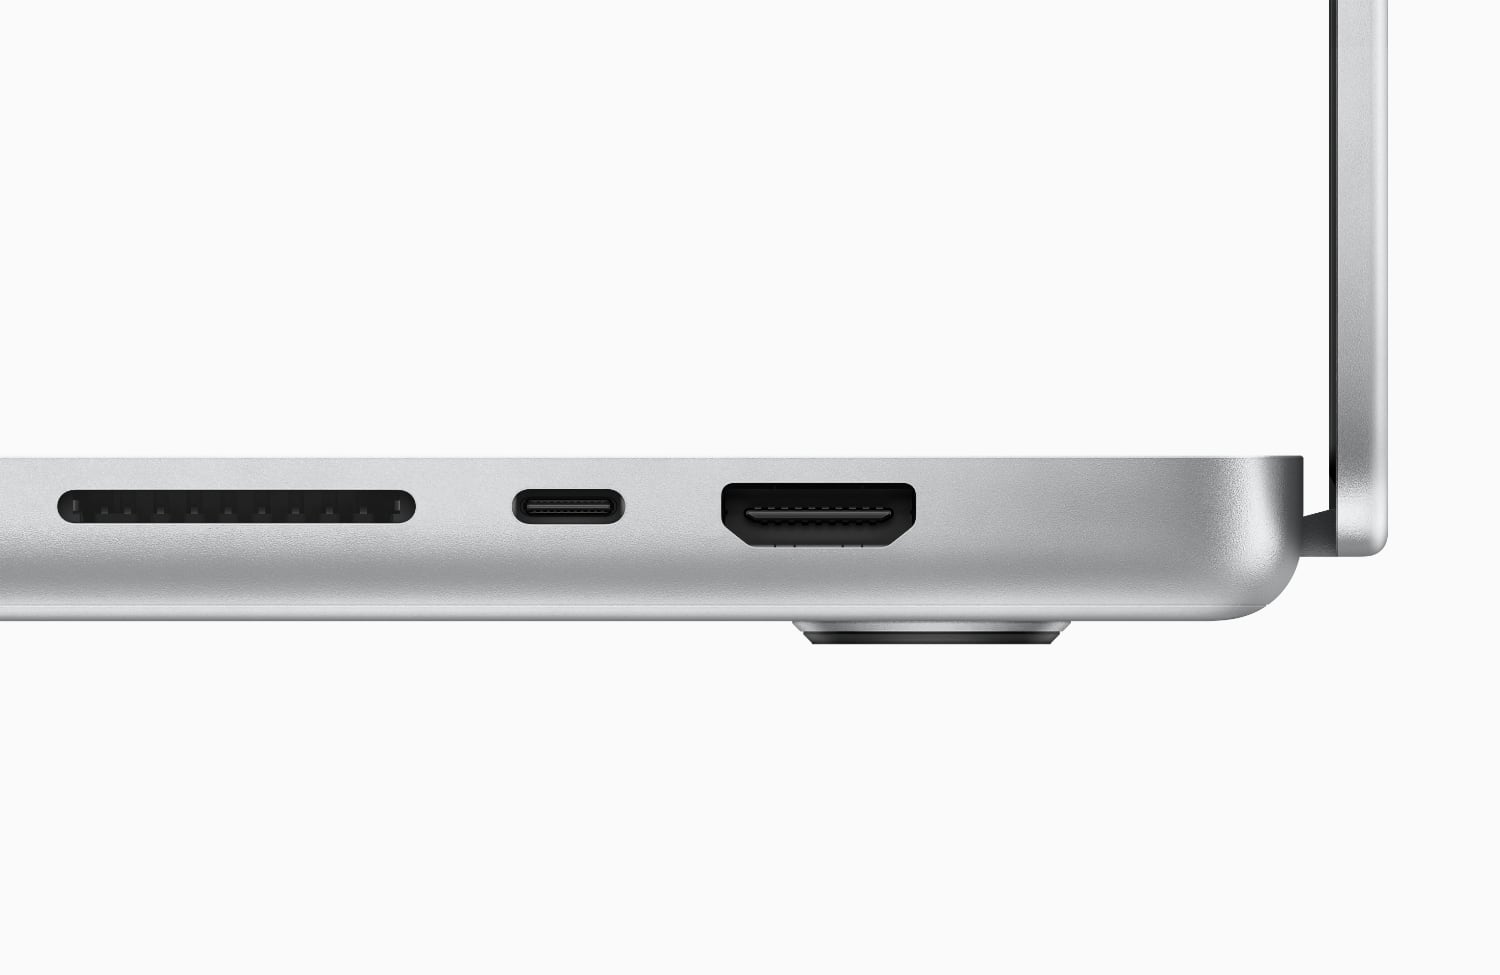 The new MacBook Pro models come with three USB 4 ports.